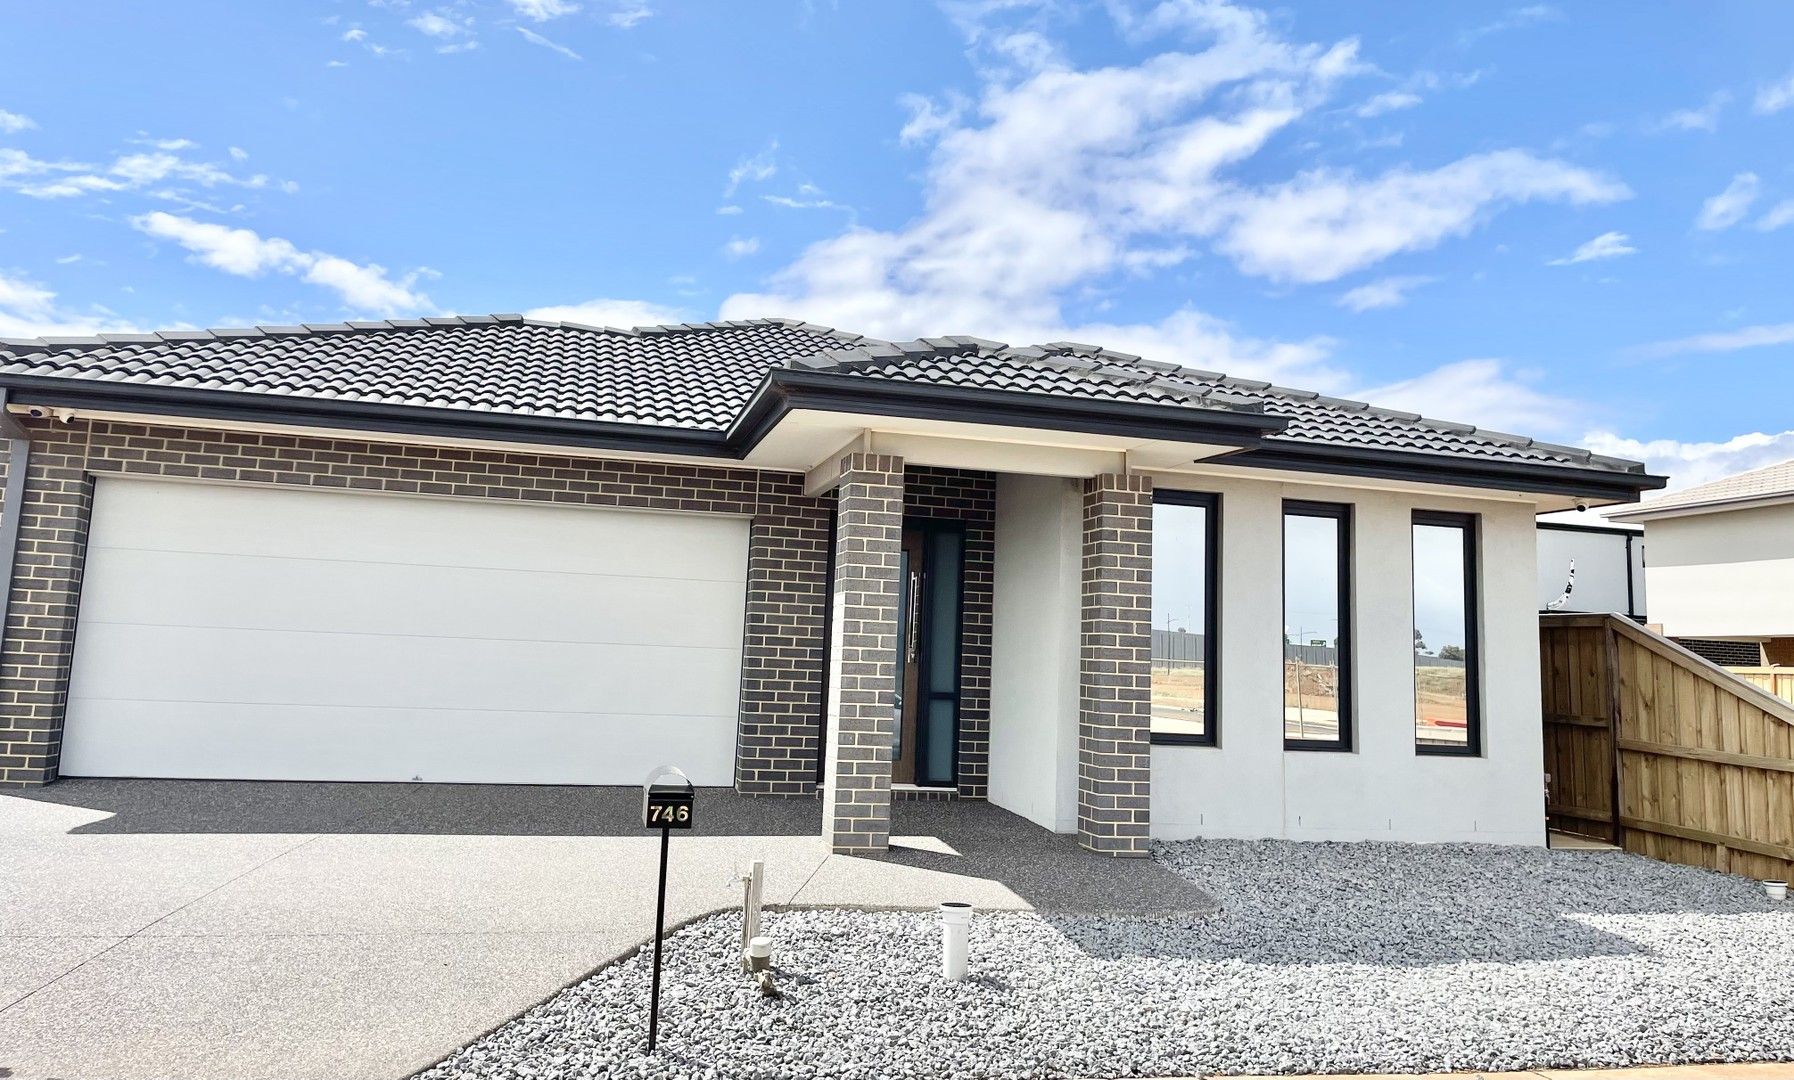 4 bedrooms House in 746 Neale Road DEANSIDE VIC, 3336